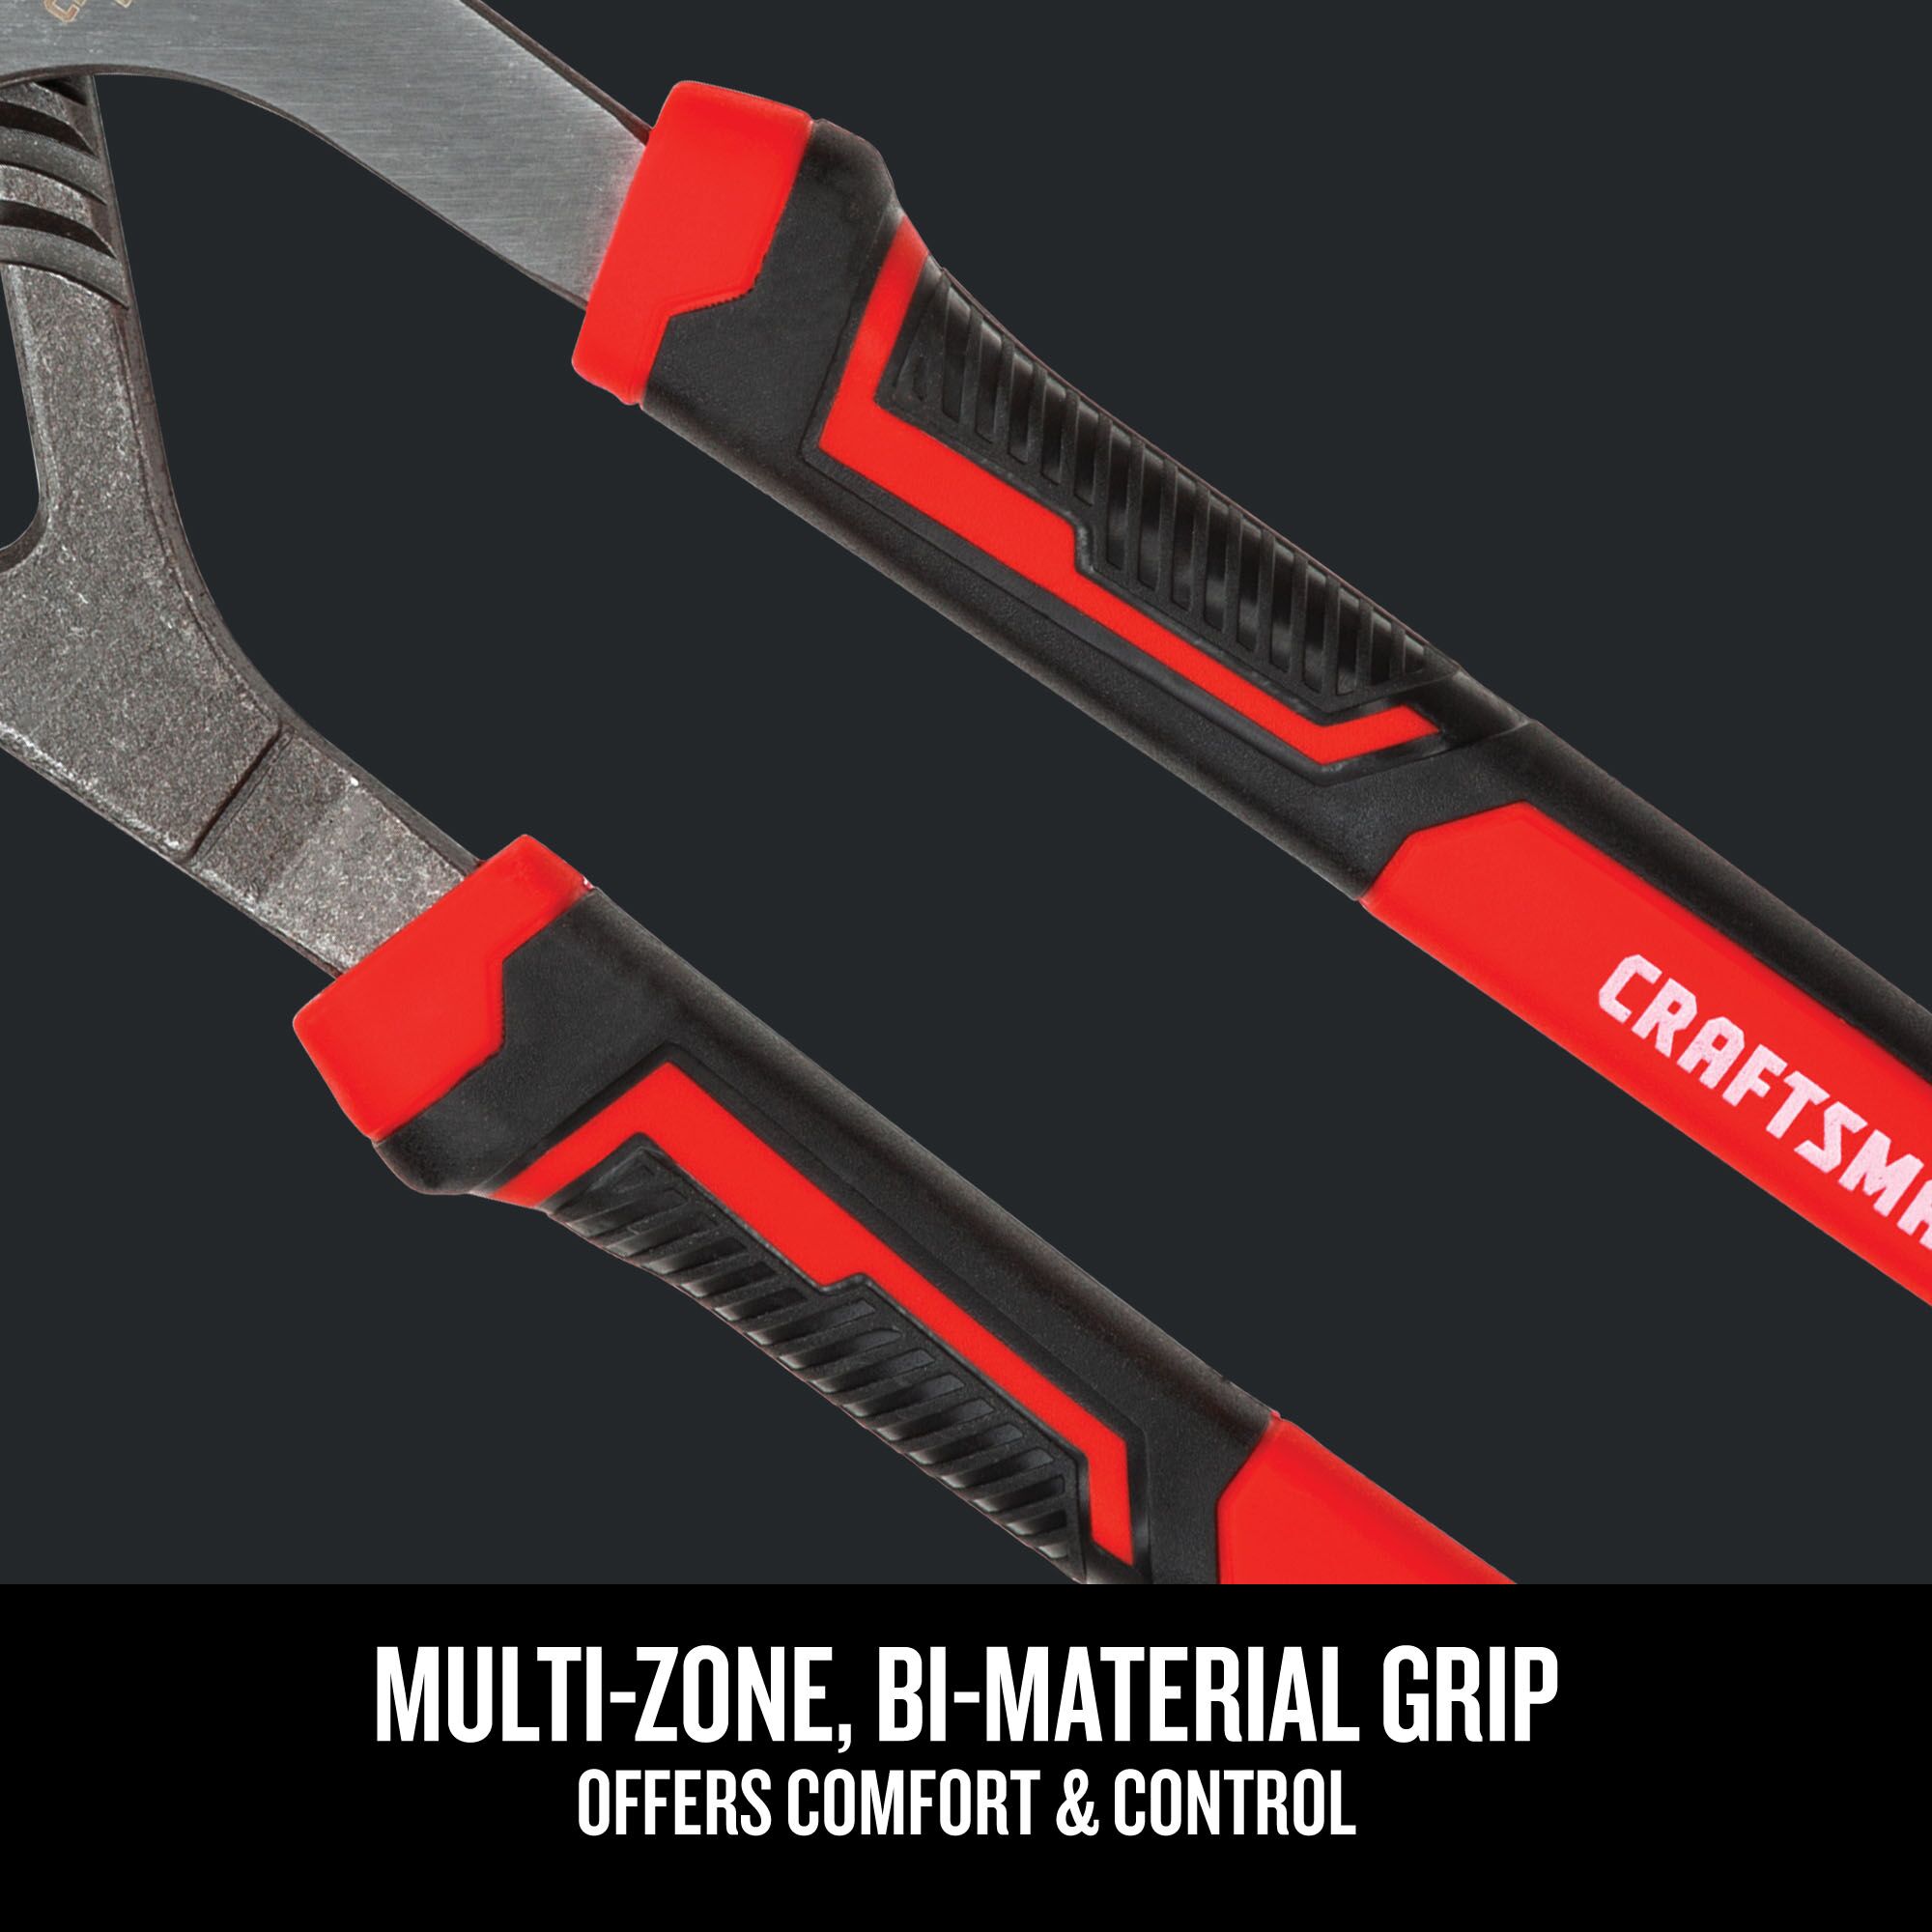 Graphic of CRAFTSMAN Pliers: Tongue & Grove Set highlighting product features